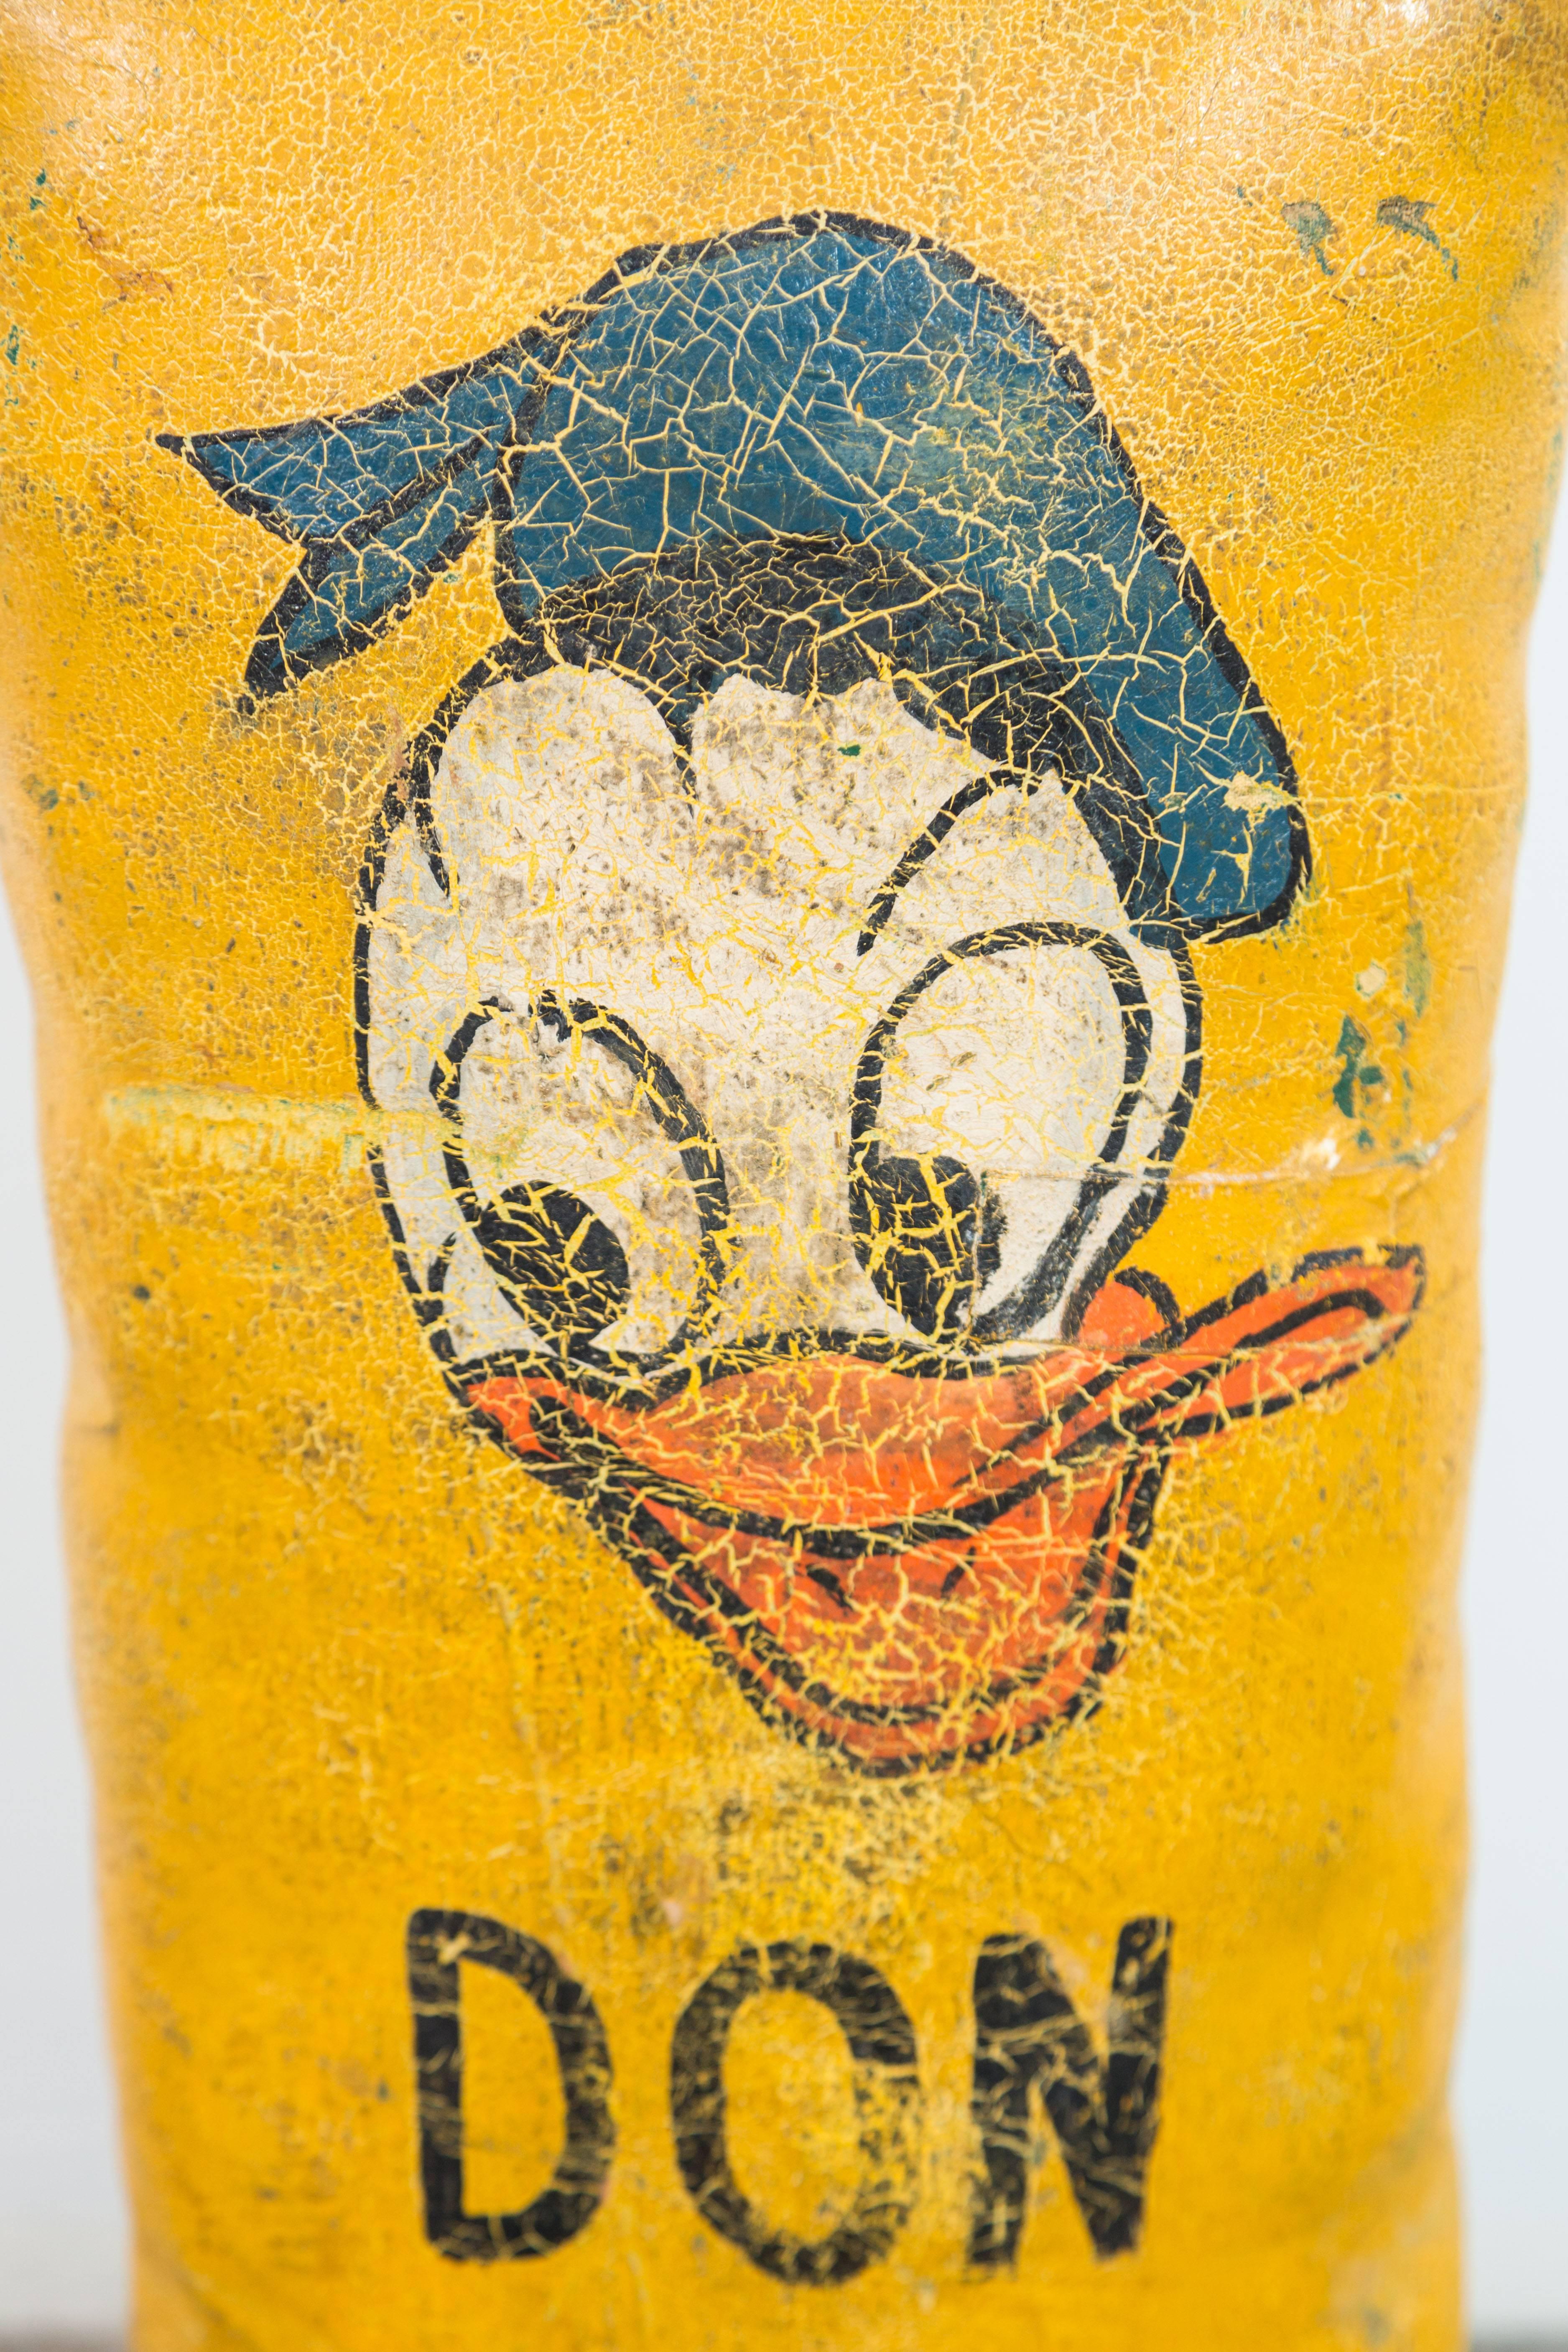 Vintage carnival midway knockdown punk. Perhaps one of a kind Don duck? Great condition and vibrant paint surface. Donald Duck first cartoon appearance was in 1934 as part Disney's Silly Symphonies series.